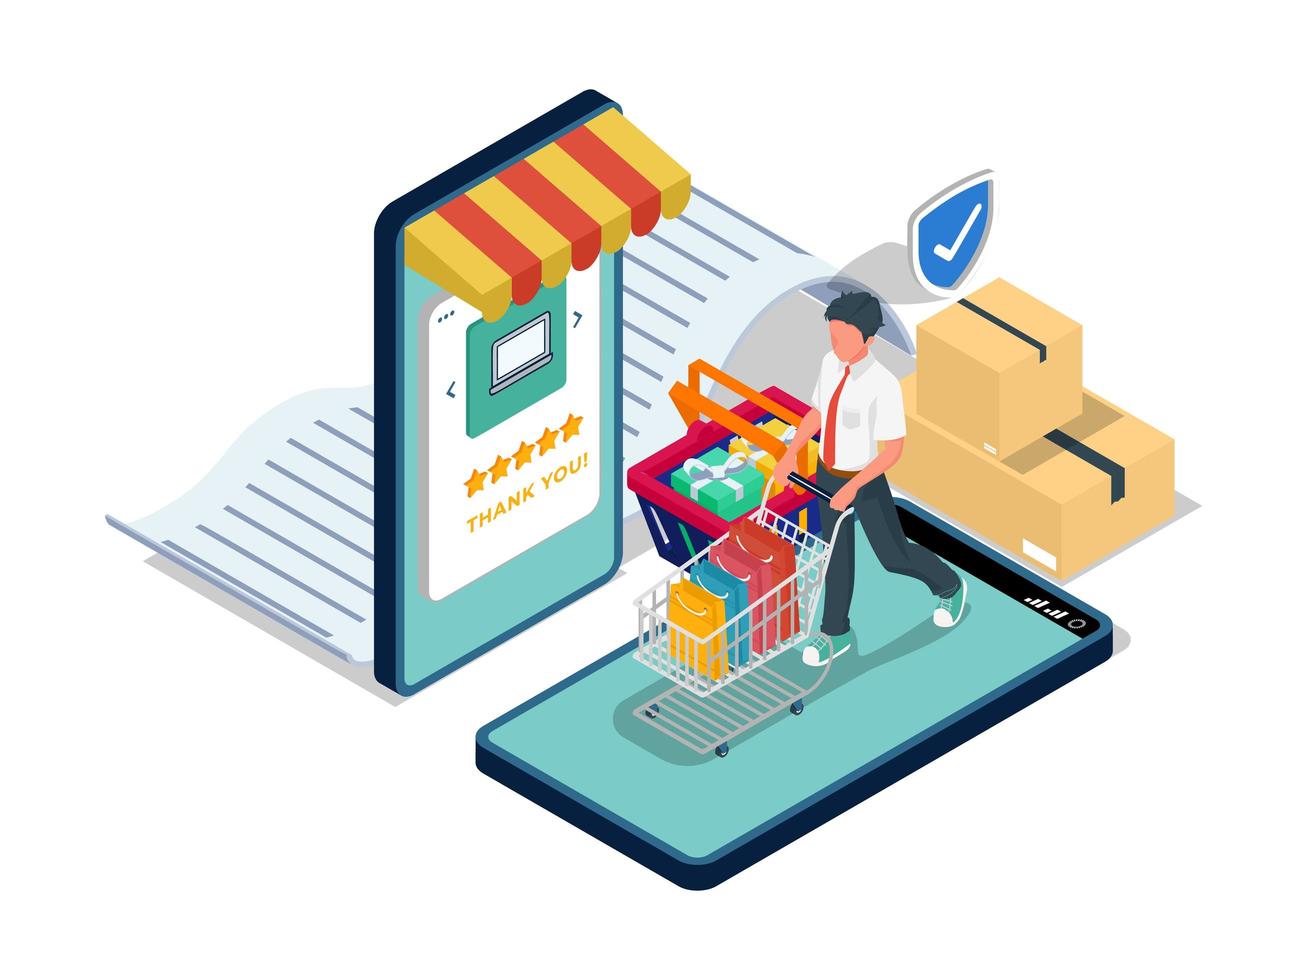 Man shopping in e-commerce marketplace vector